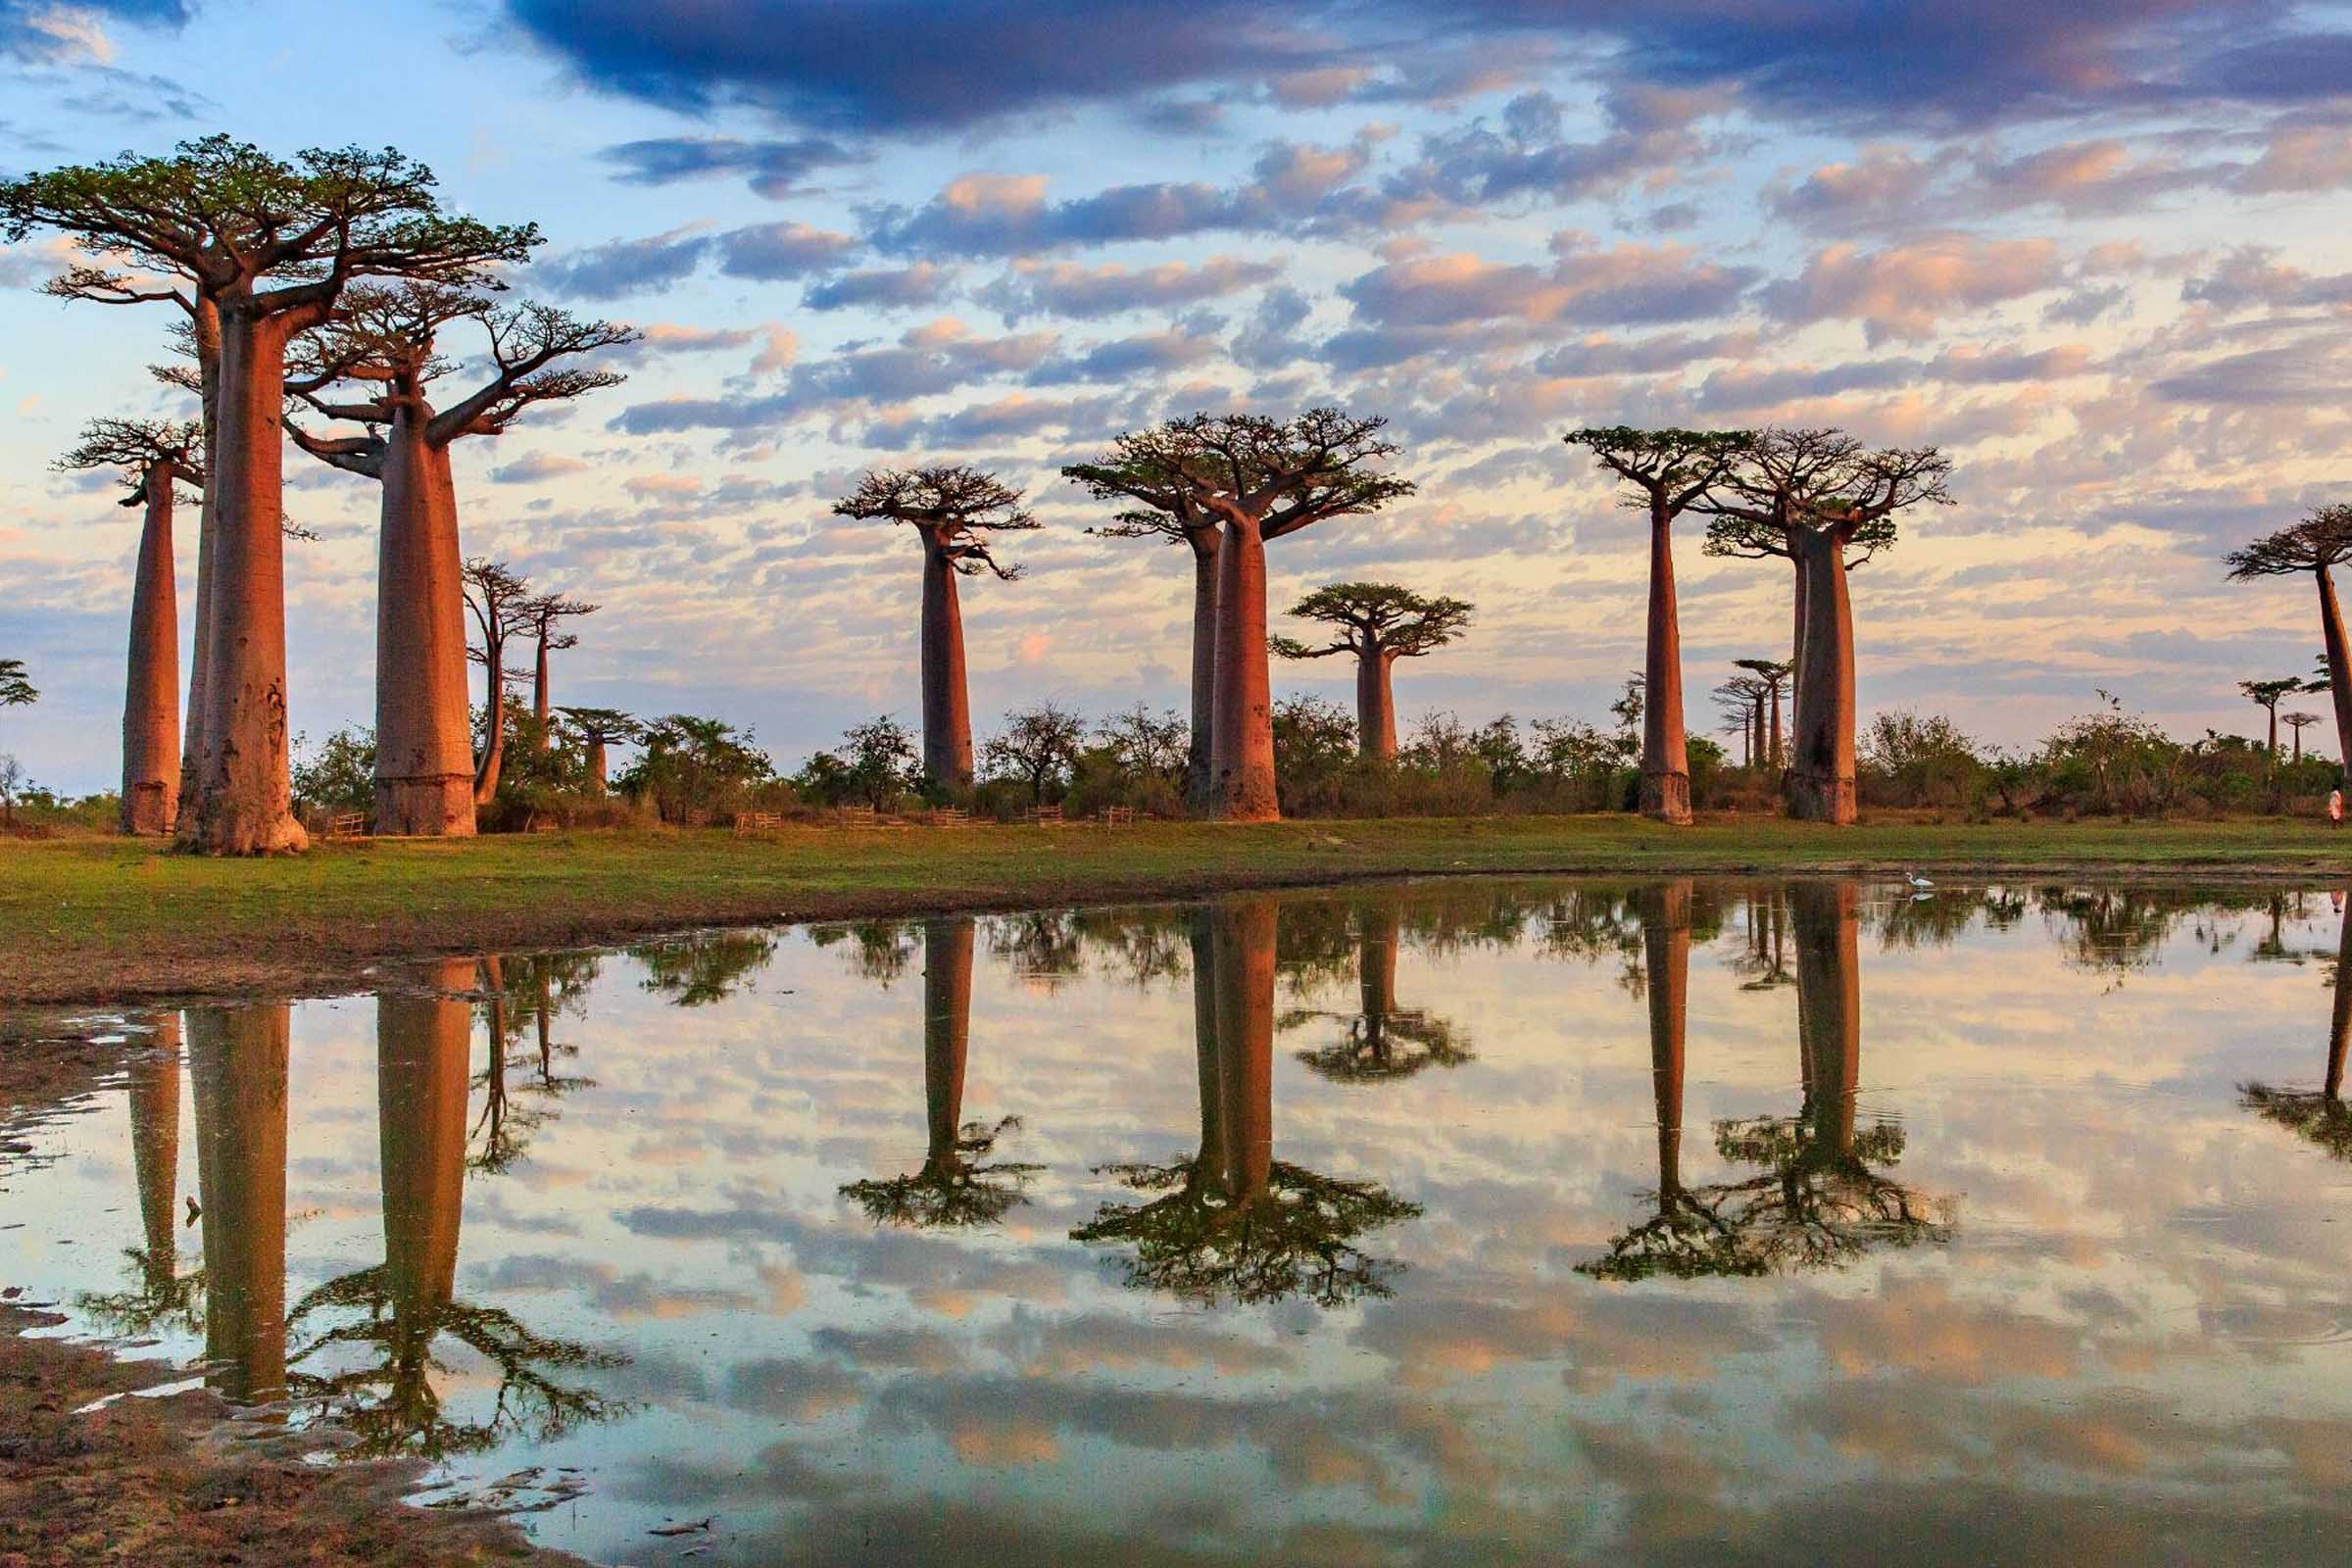 10 of the Most Unique Trees in the World - Article on Thursd